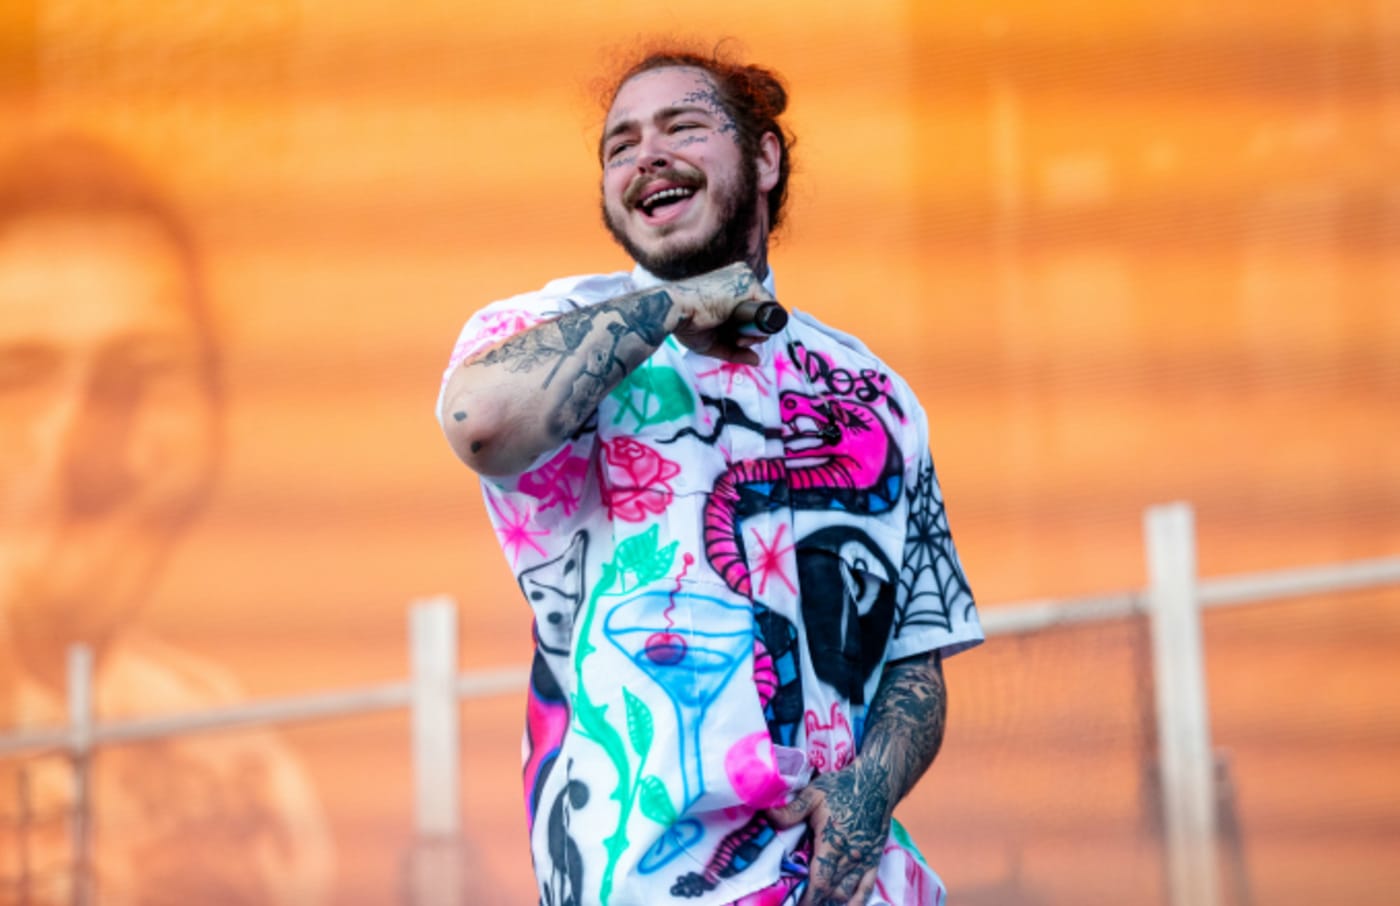 Post Malone and Swae Lee’s “Sunflower” Hits No. 1 on Billboard Hot 100 ...